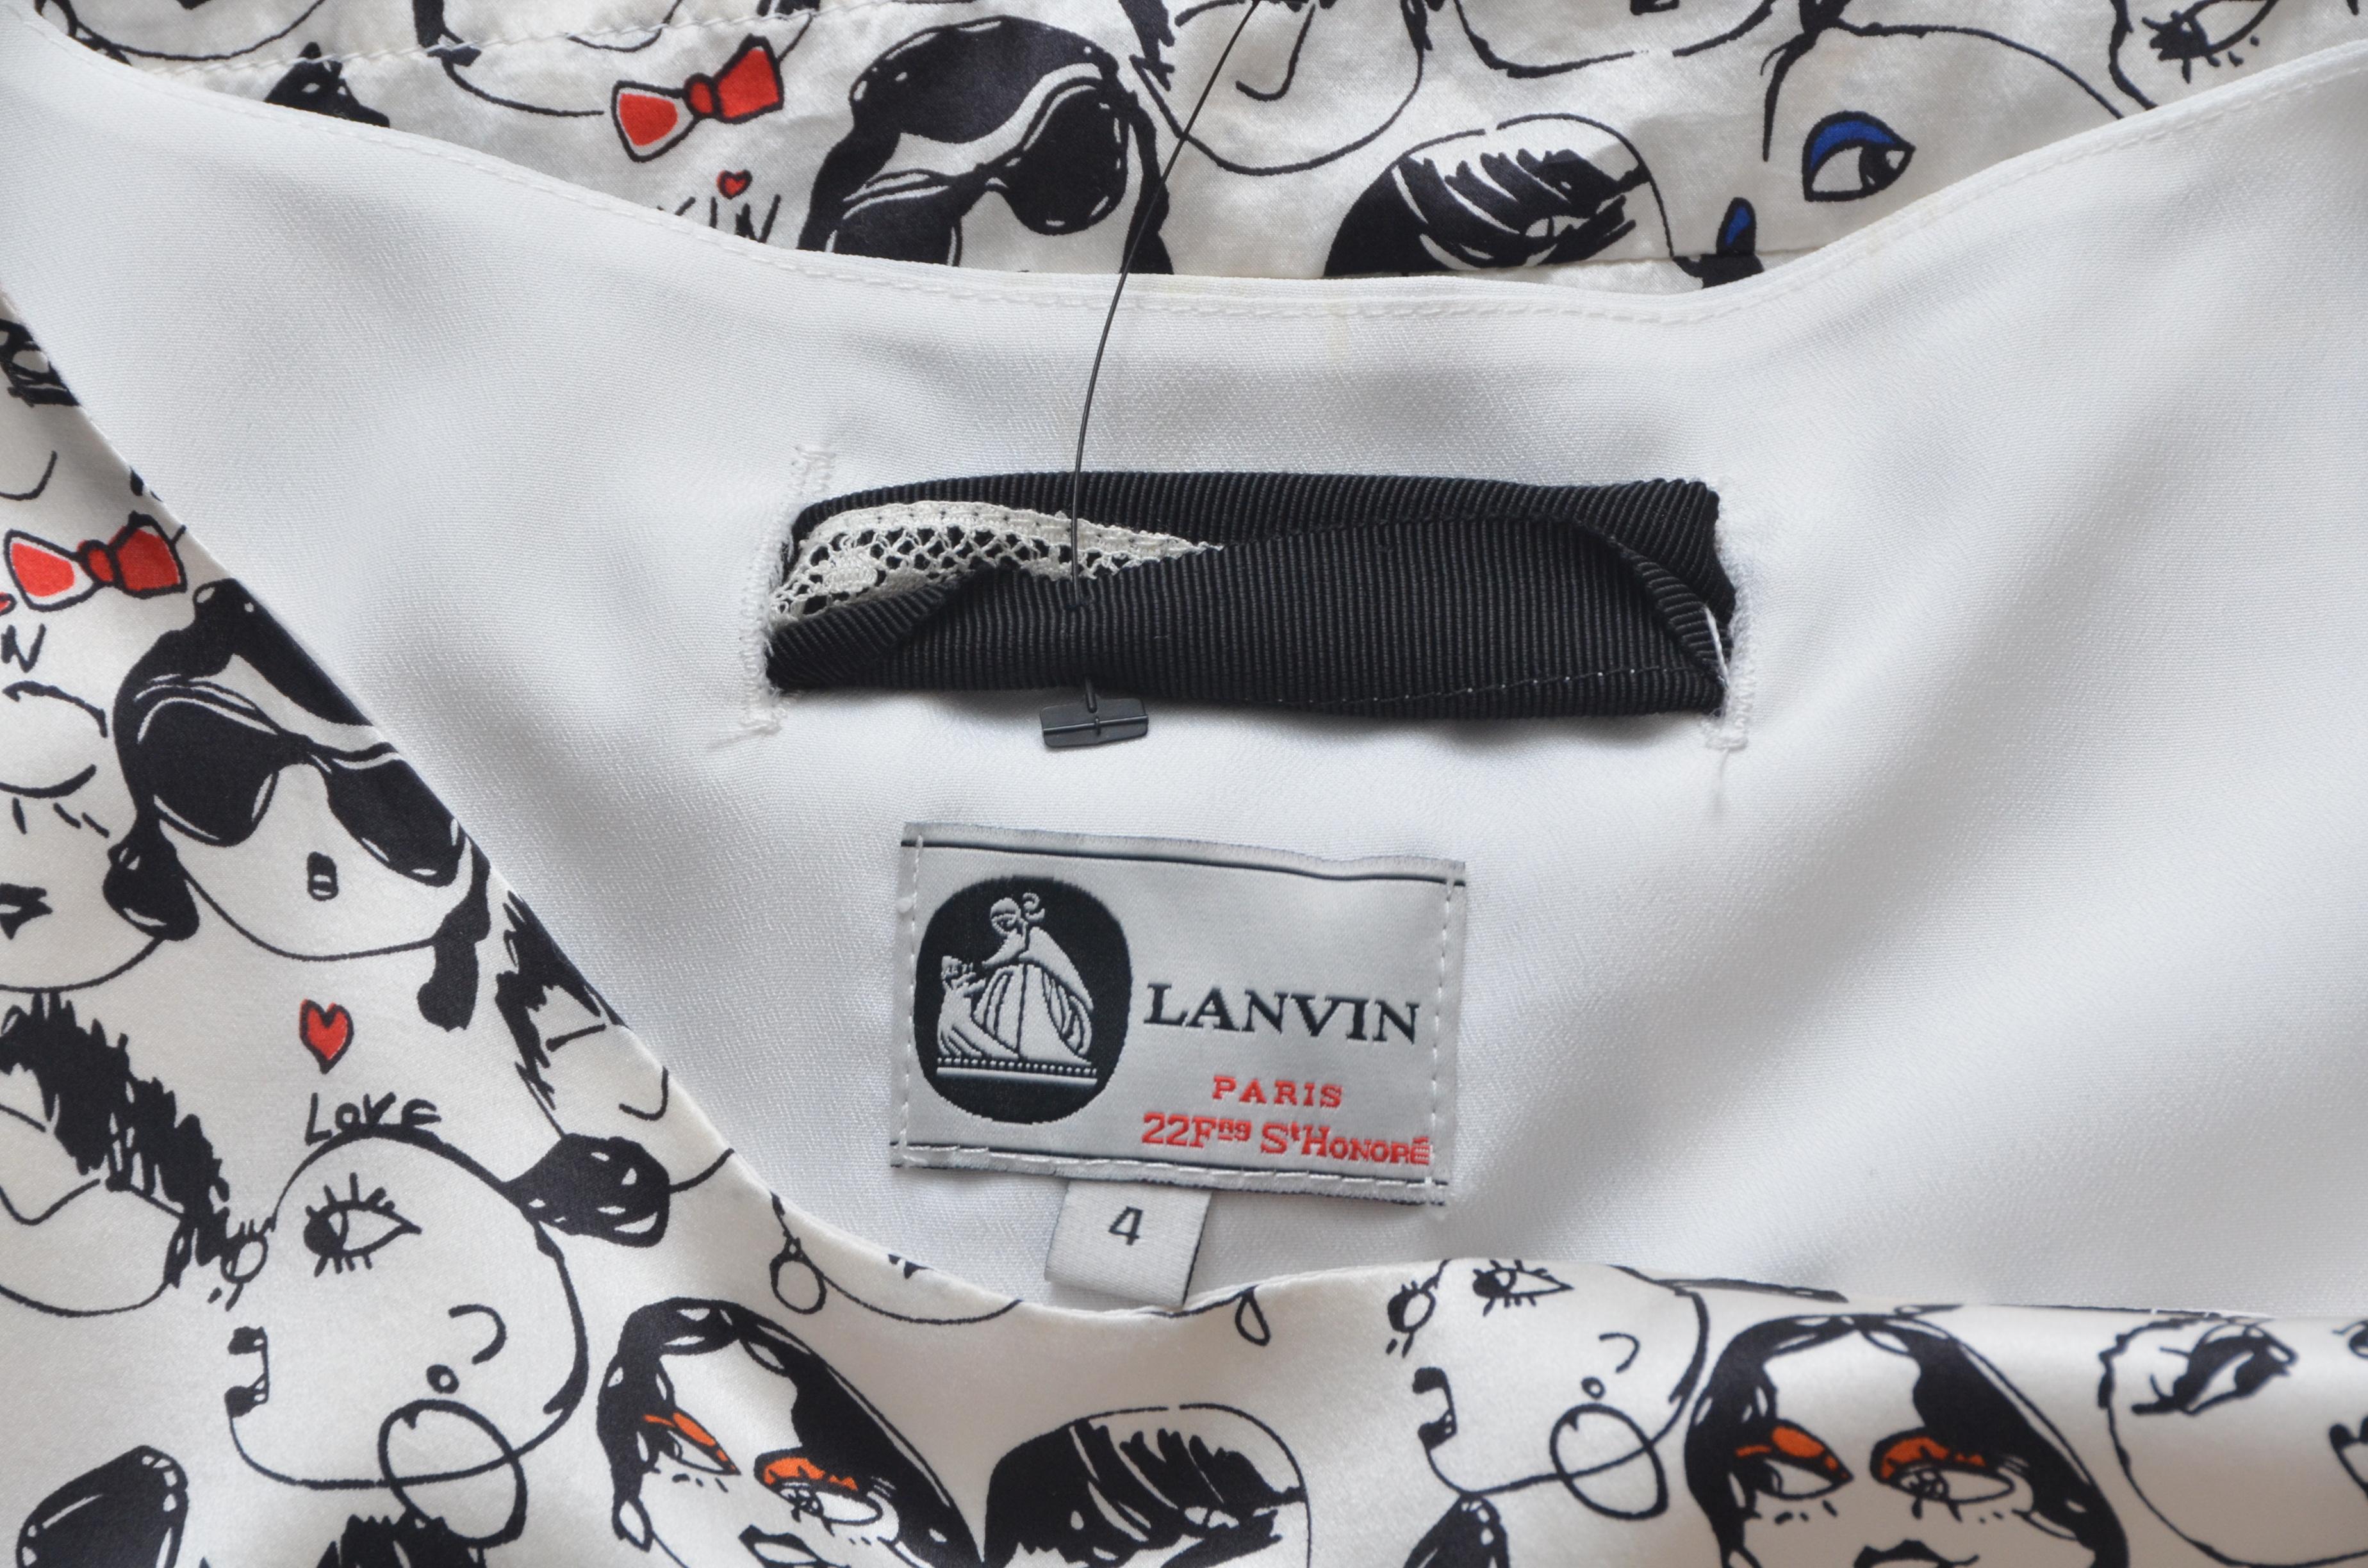 Lanvin Alber Elbaz Face Print Dress x Paper Fan   In Good Condition For Sale In New York, NY